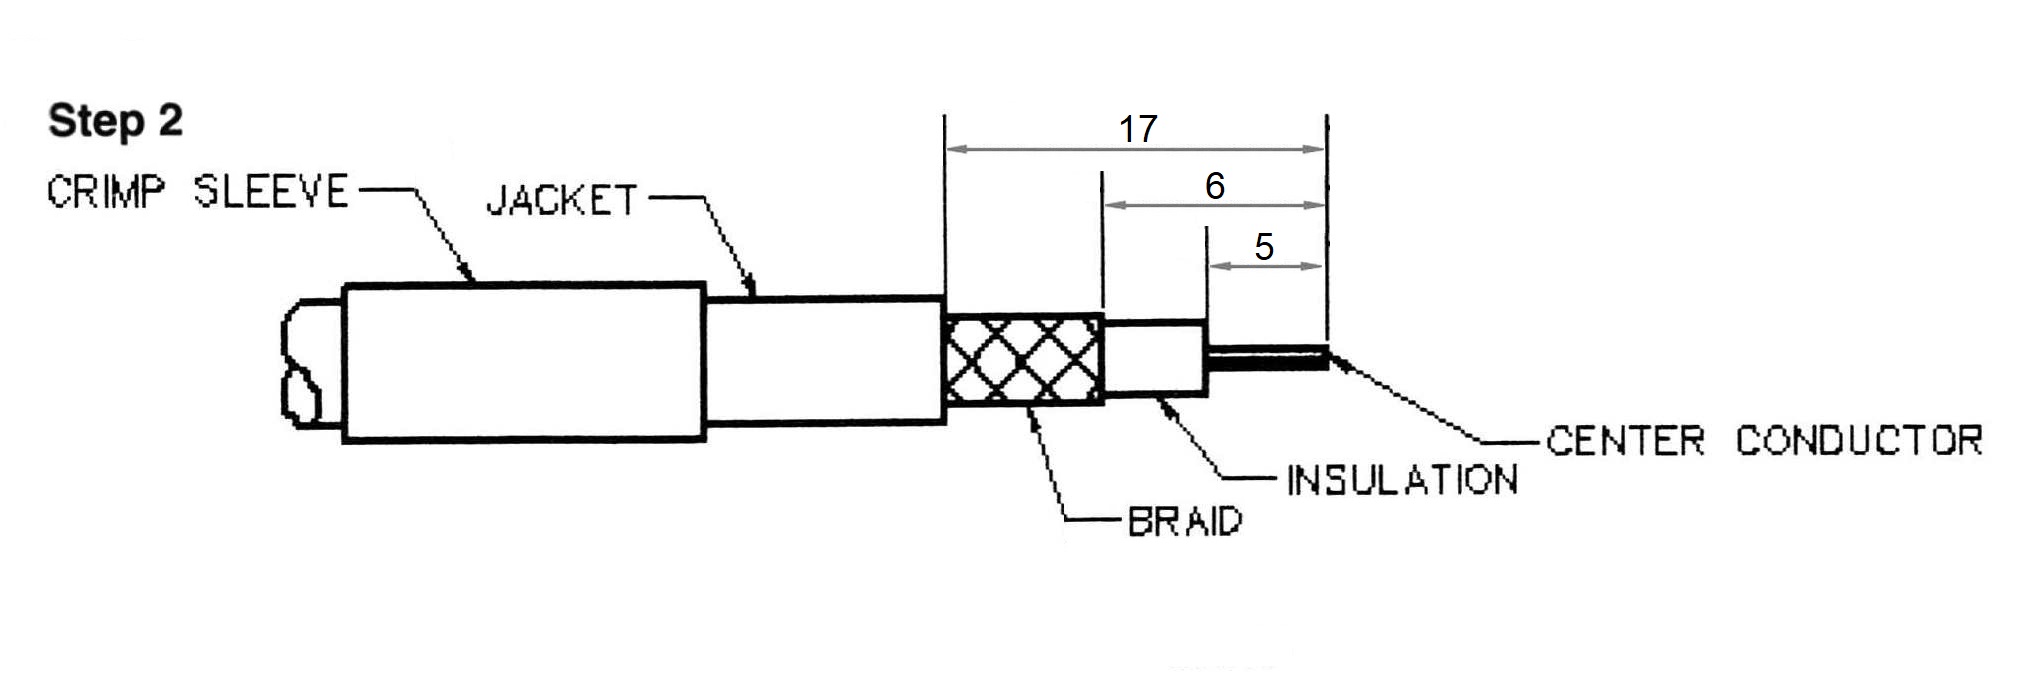 BNC female Crimp On for RG-174, RG-316, LMR-100A, and other 0.100 Inch OD Coax 7006-BNC-174 Installation Guide step 2 - Max-Gain Systems Inc